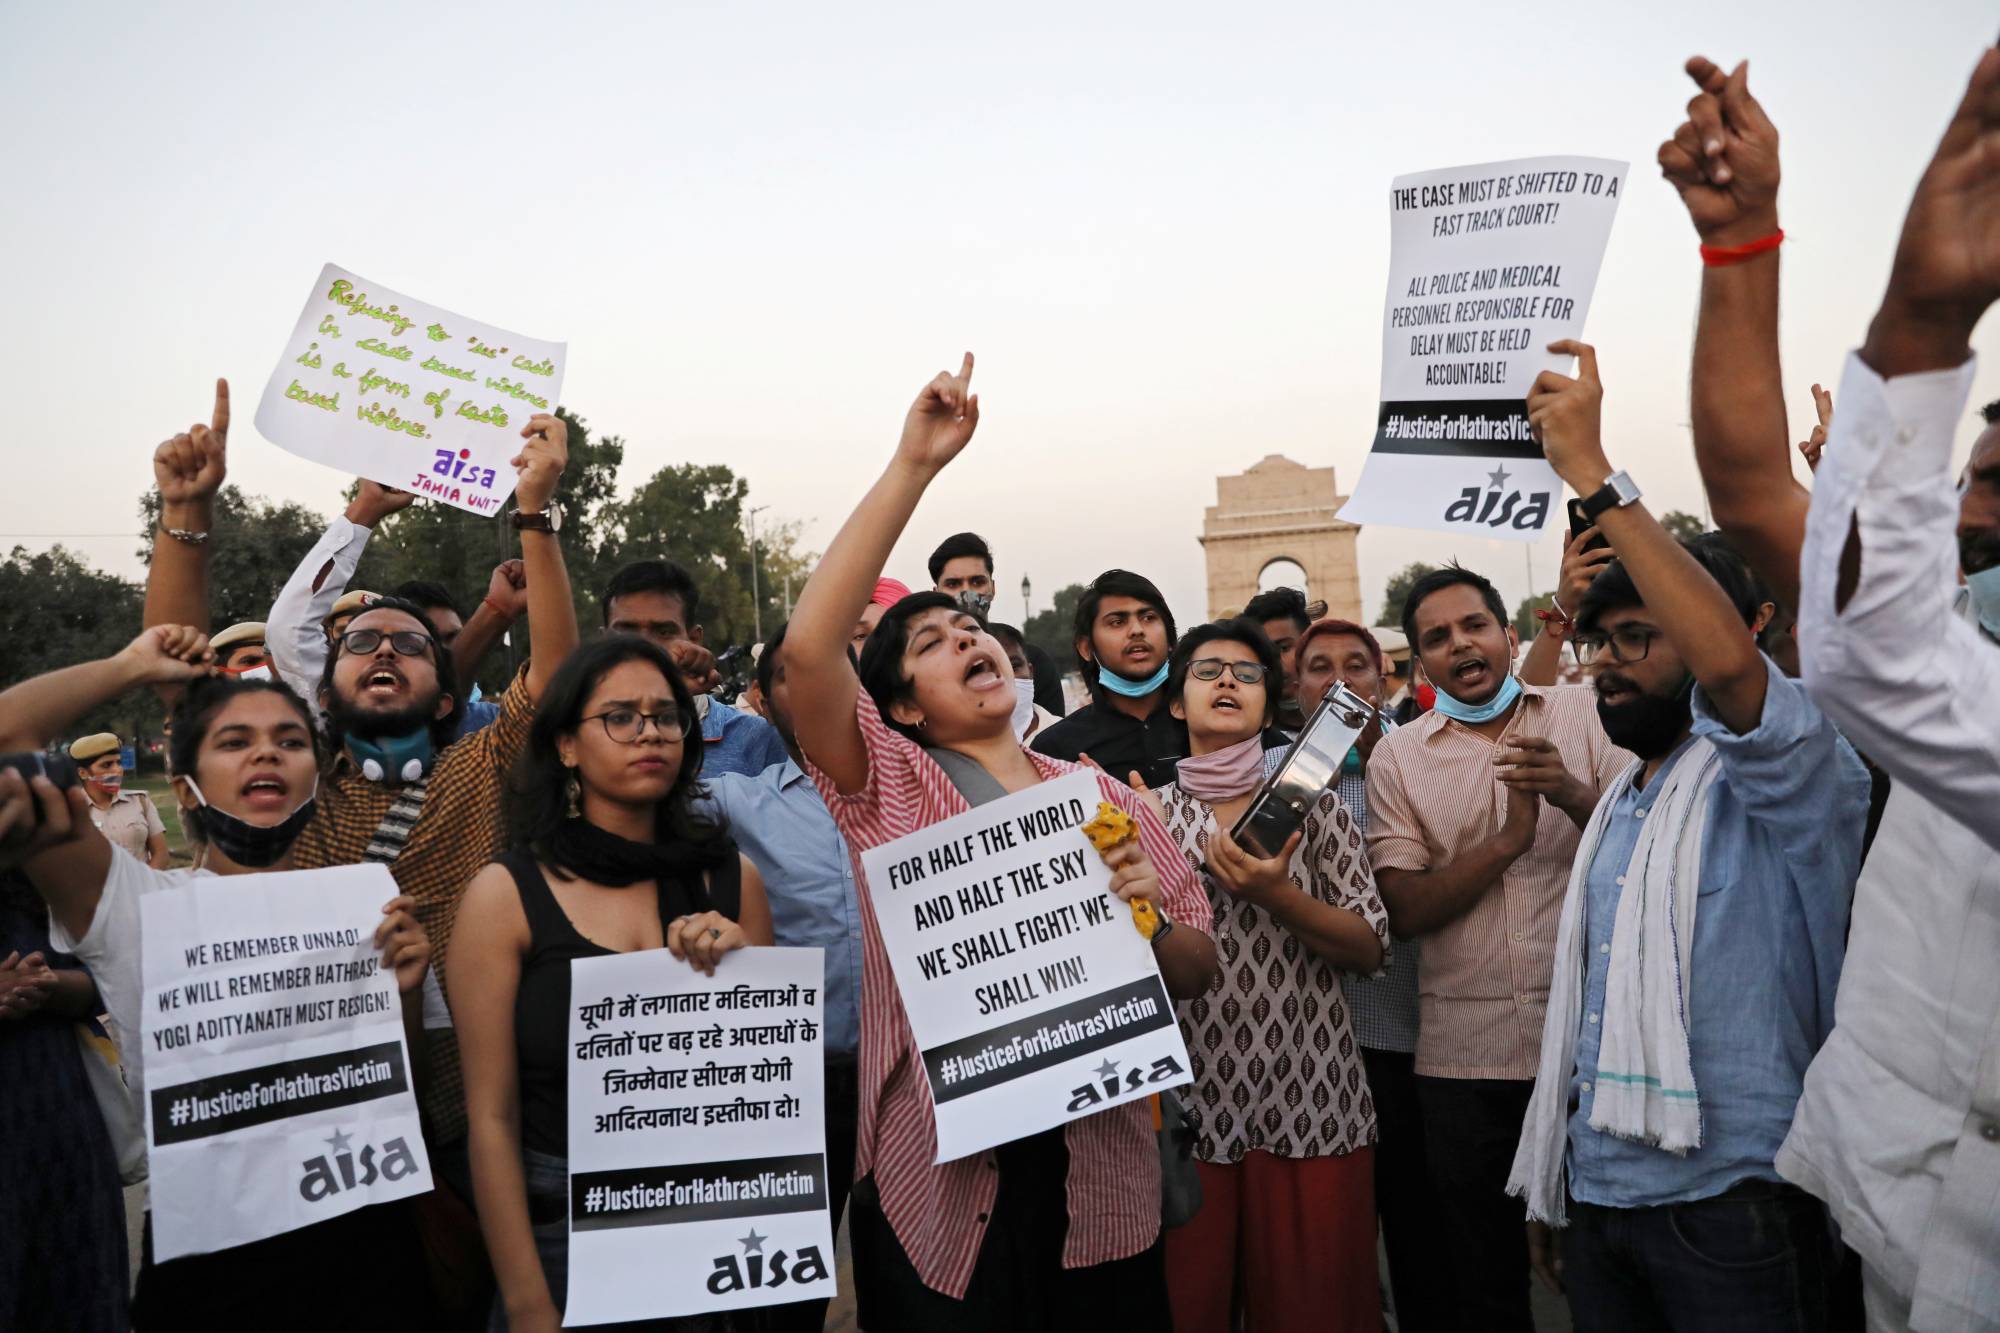 Woman dies in New Delhi after gang rape, fueling outrage again in India